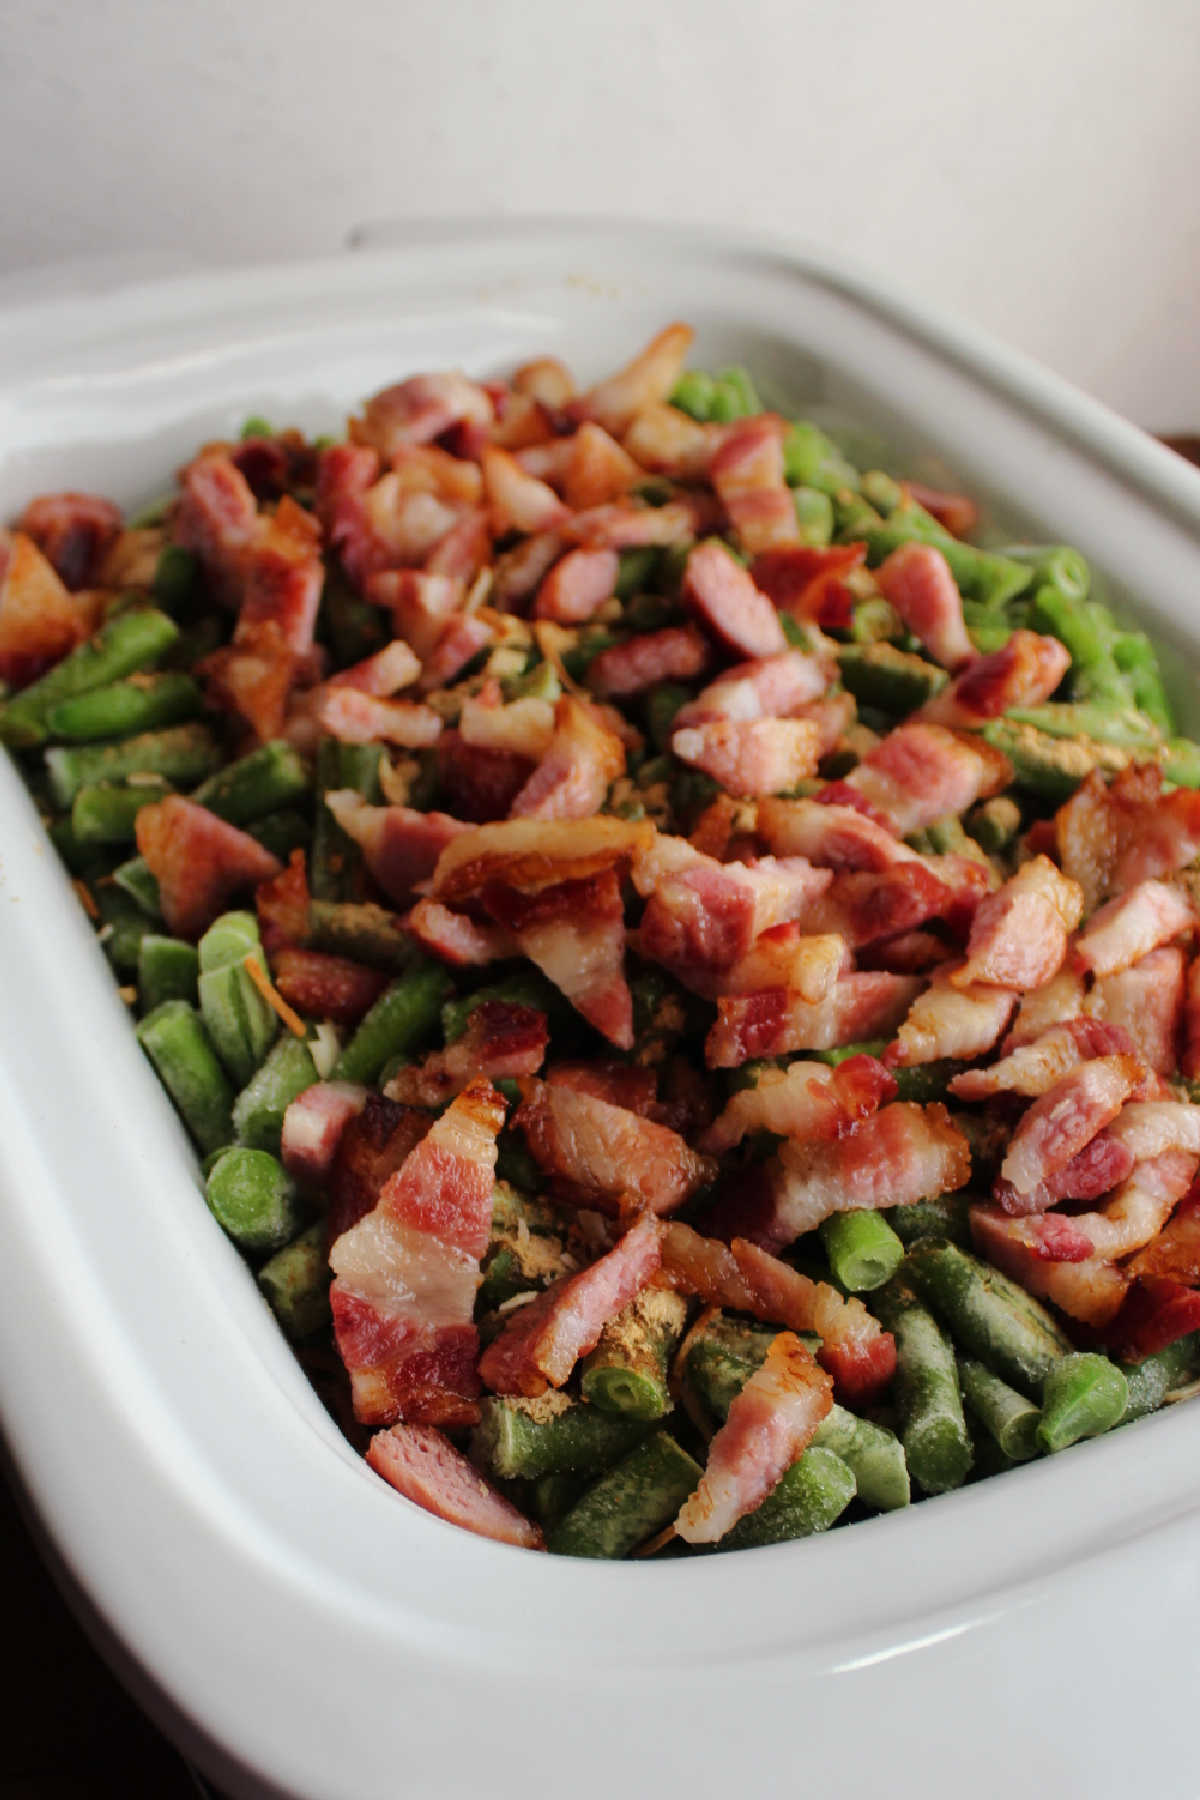 Lots of big bacon pieces over green beans in slow cooker.